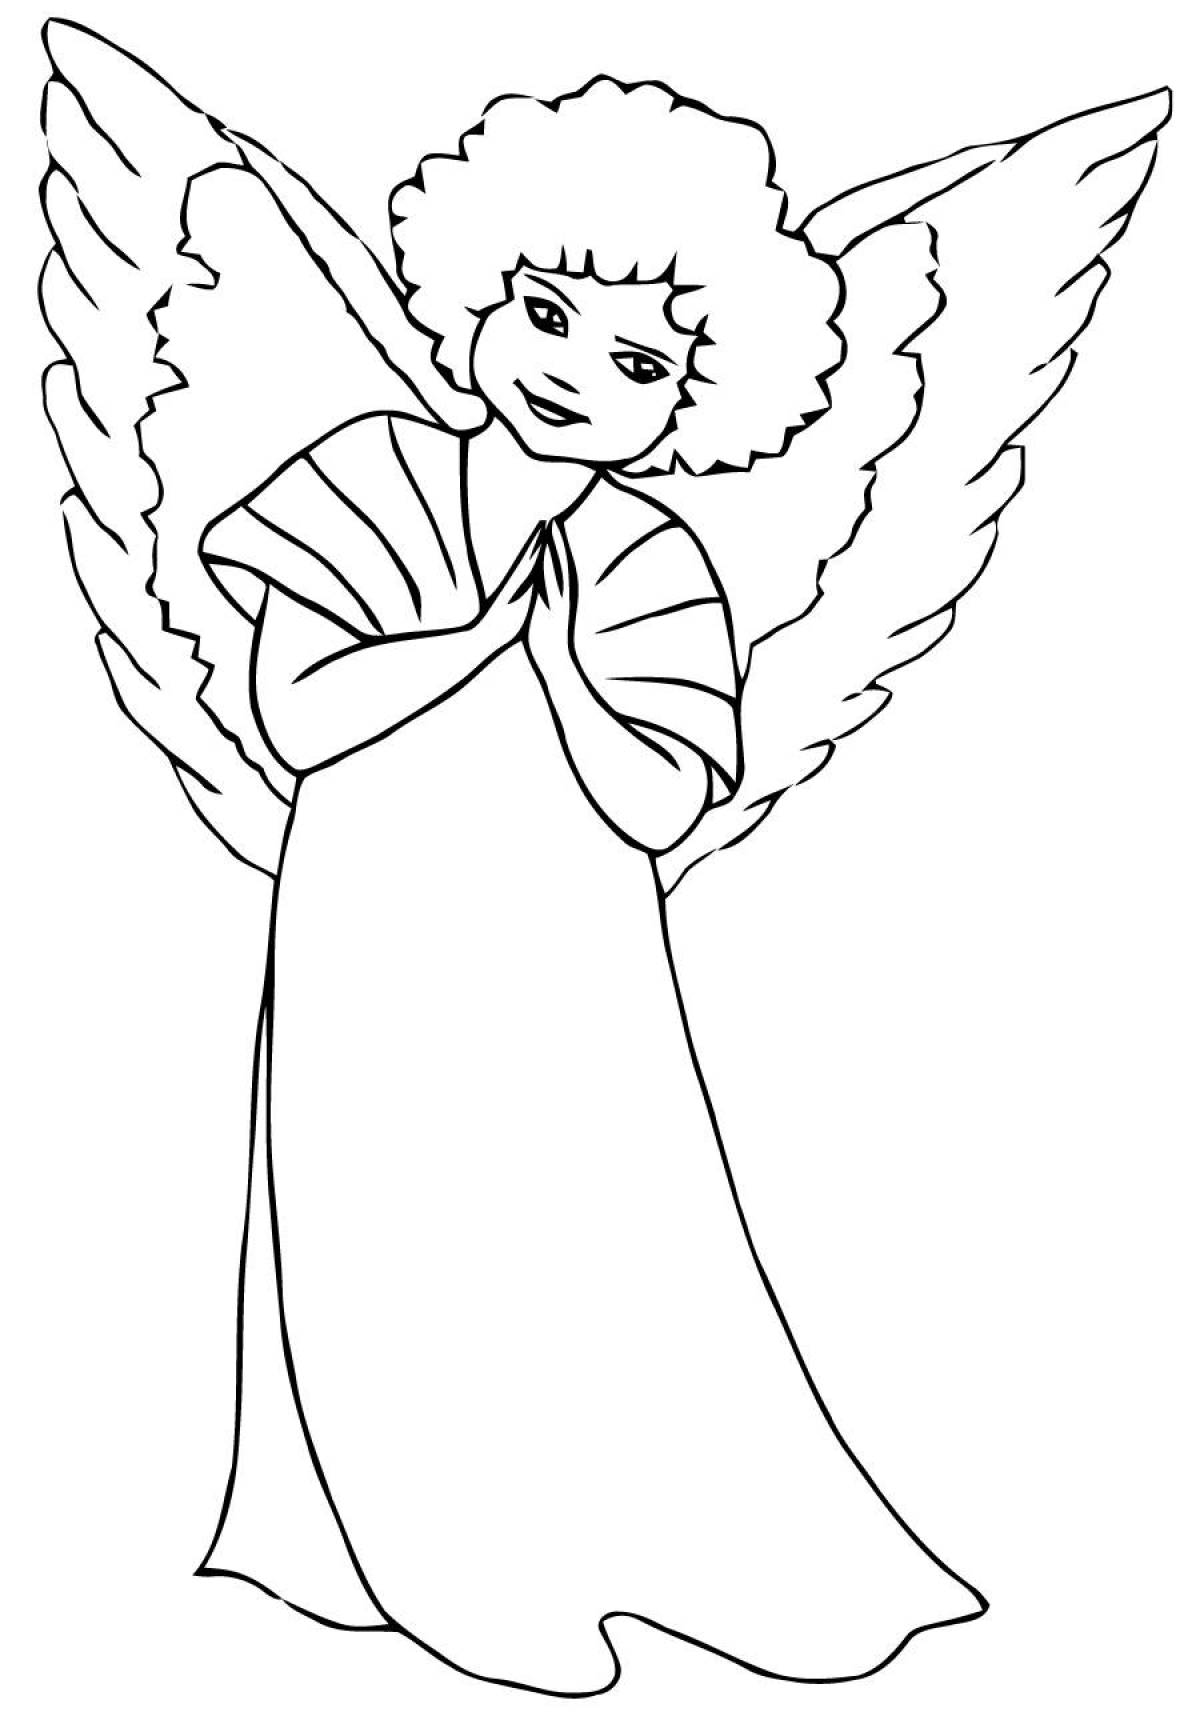 Exquisite coloring angel with wings for kids